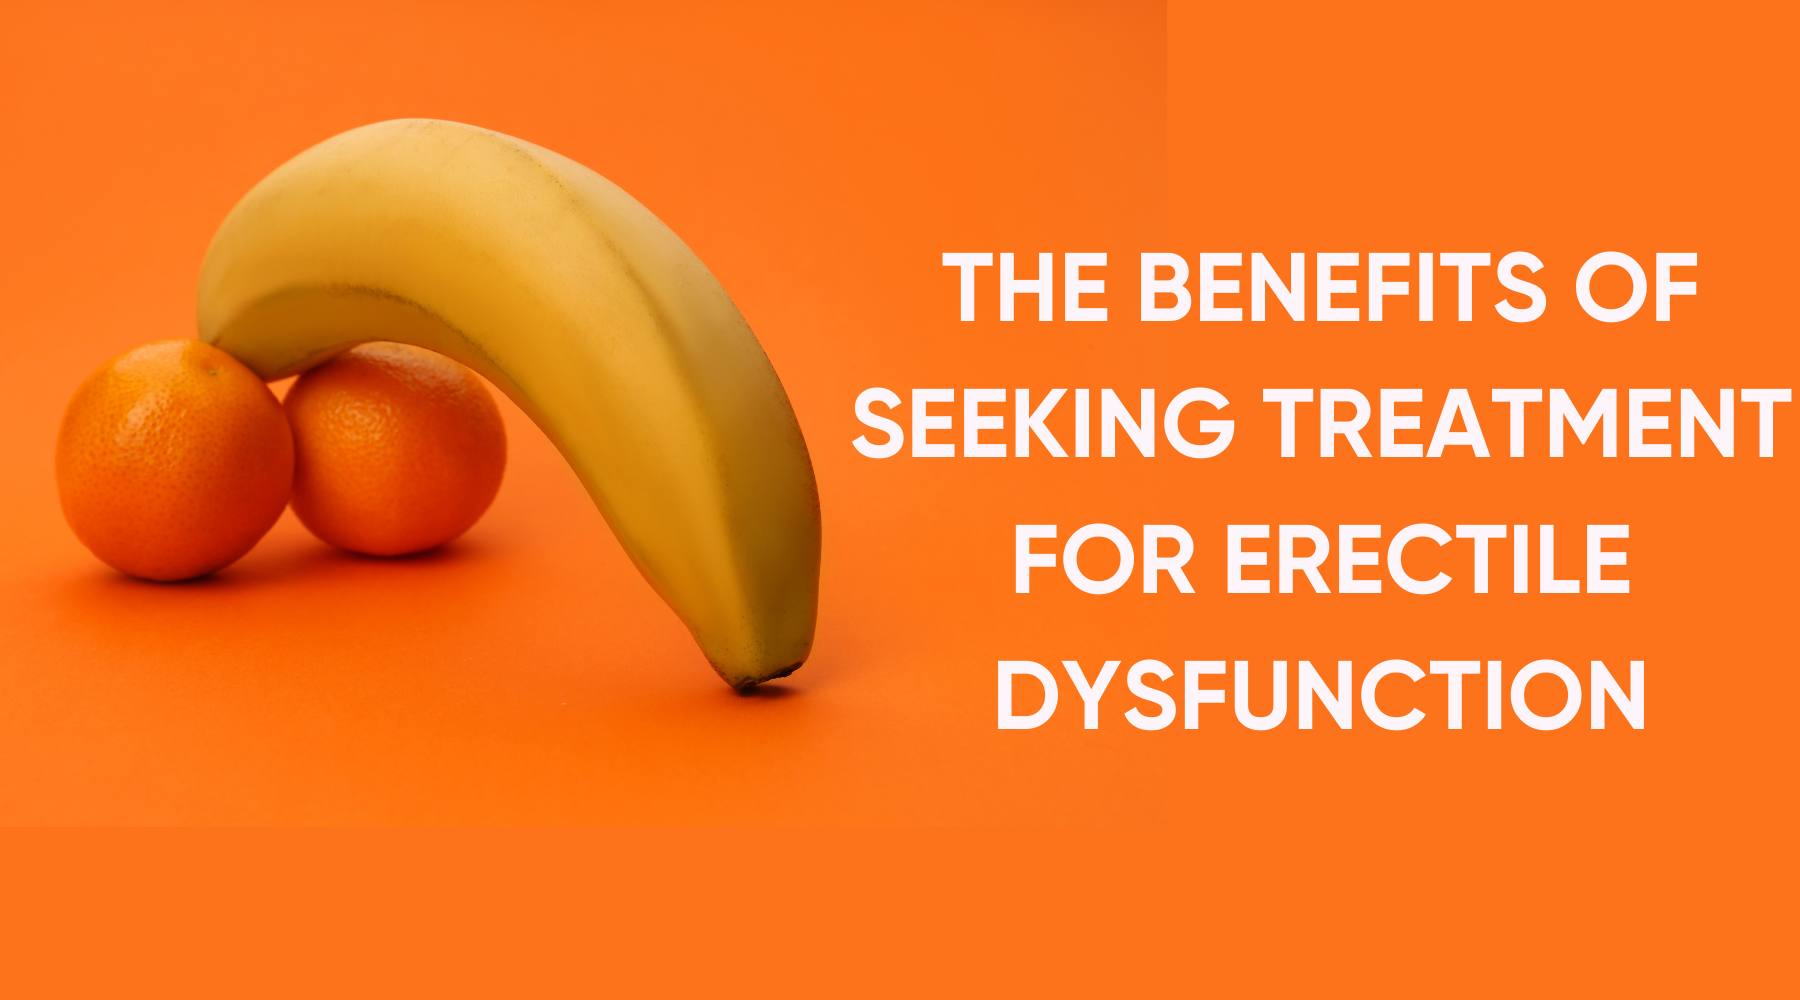 THE BENEFITS OF SEEKING TREATMENT FOR ERECTILE DYSFUNCTION